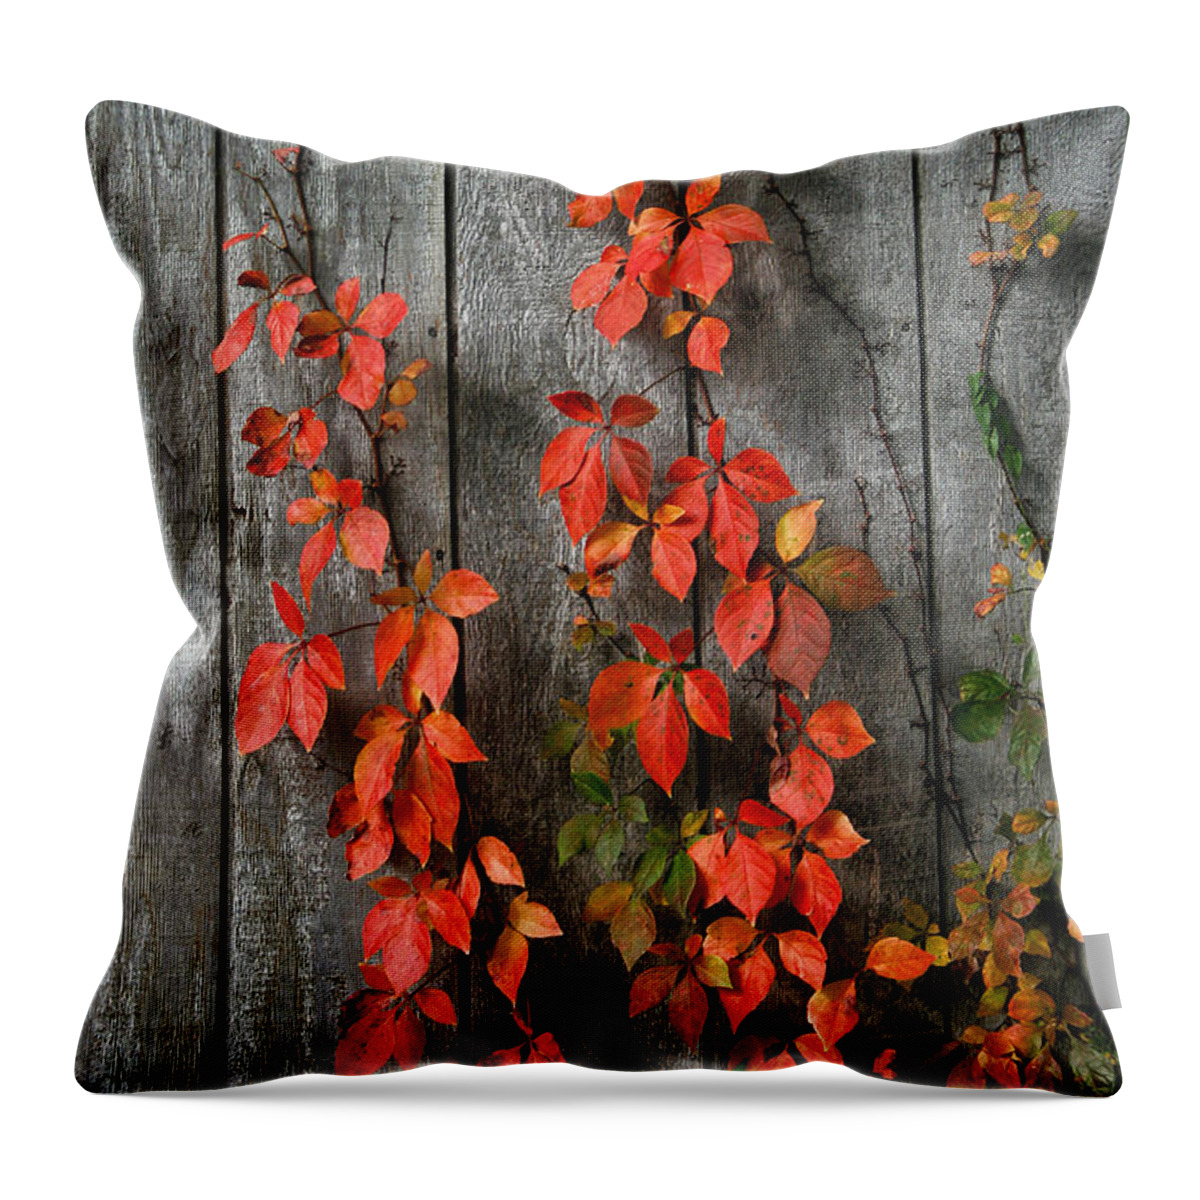 Vines Throw Pillow featuring the photograph Autumn Creepers by William Selander